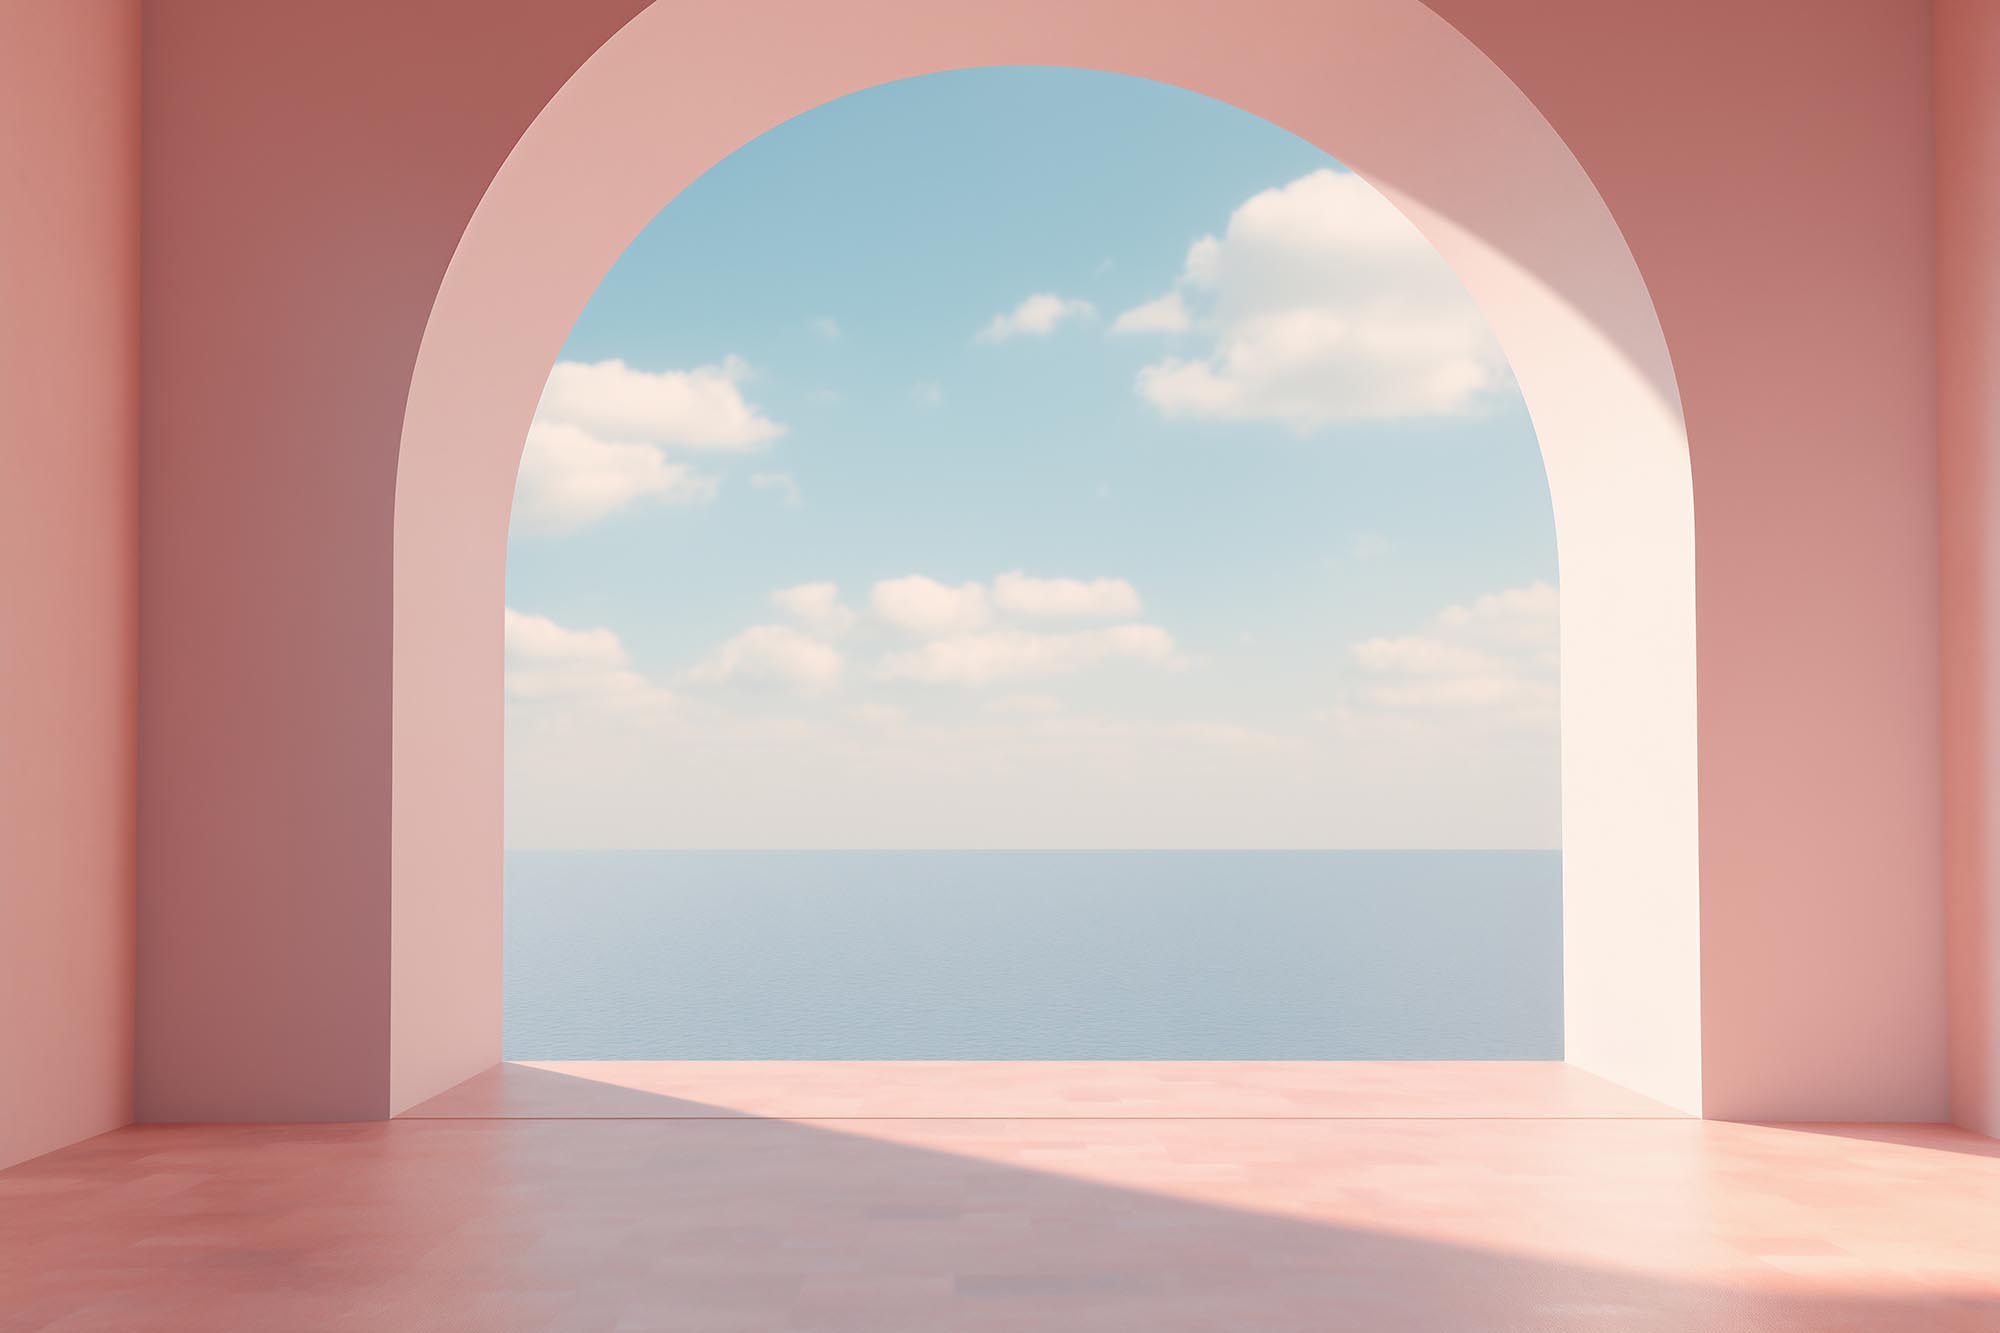 Empty pink room with arch and pillars - calming ocean view